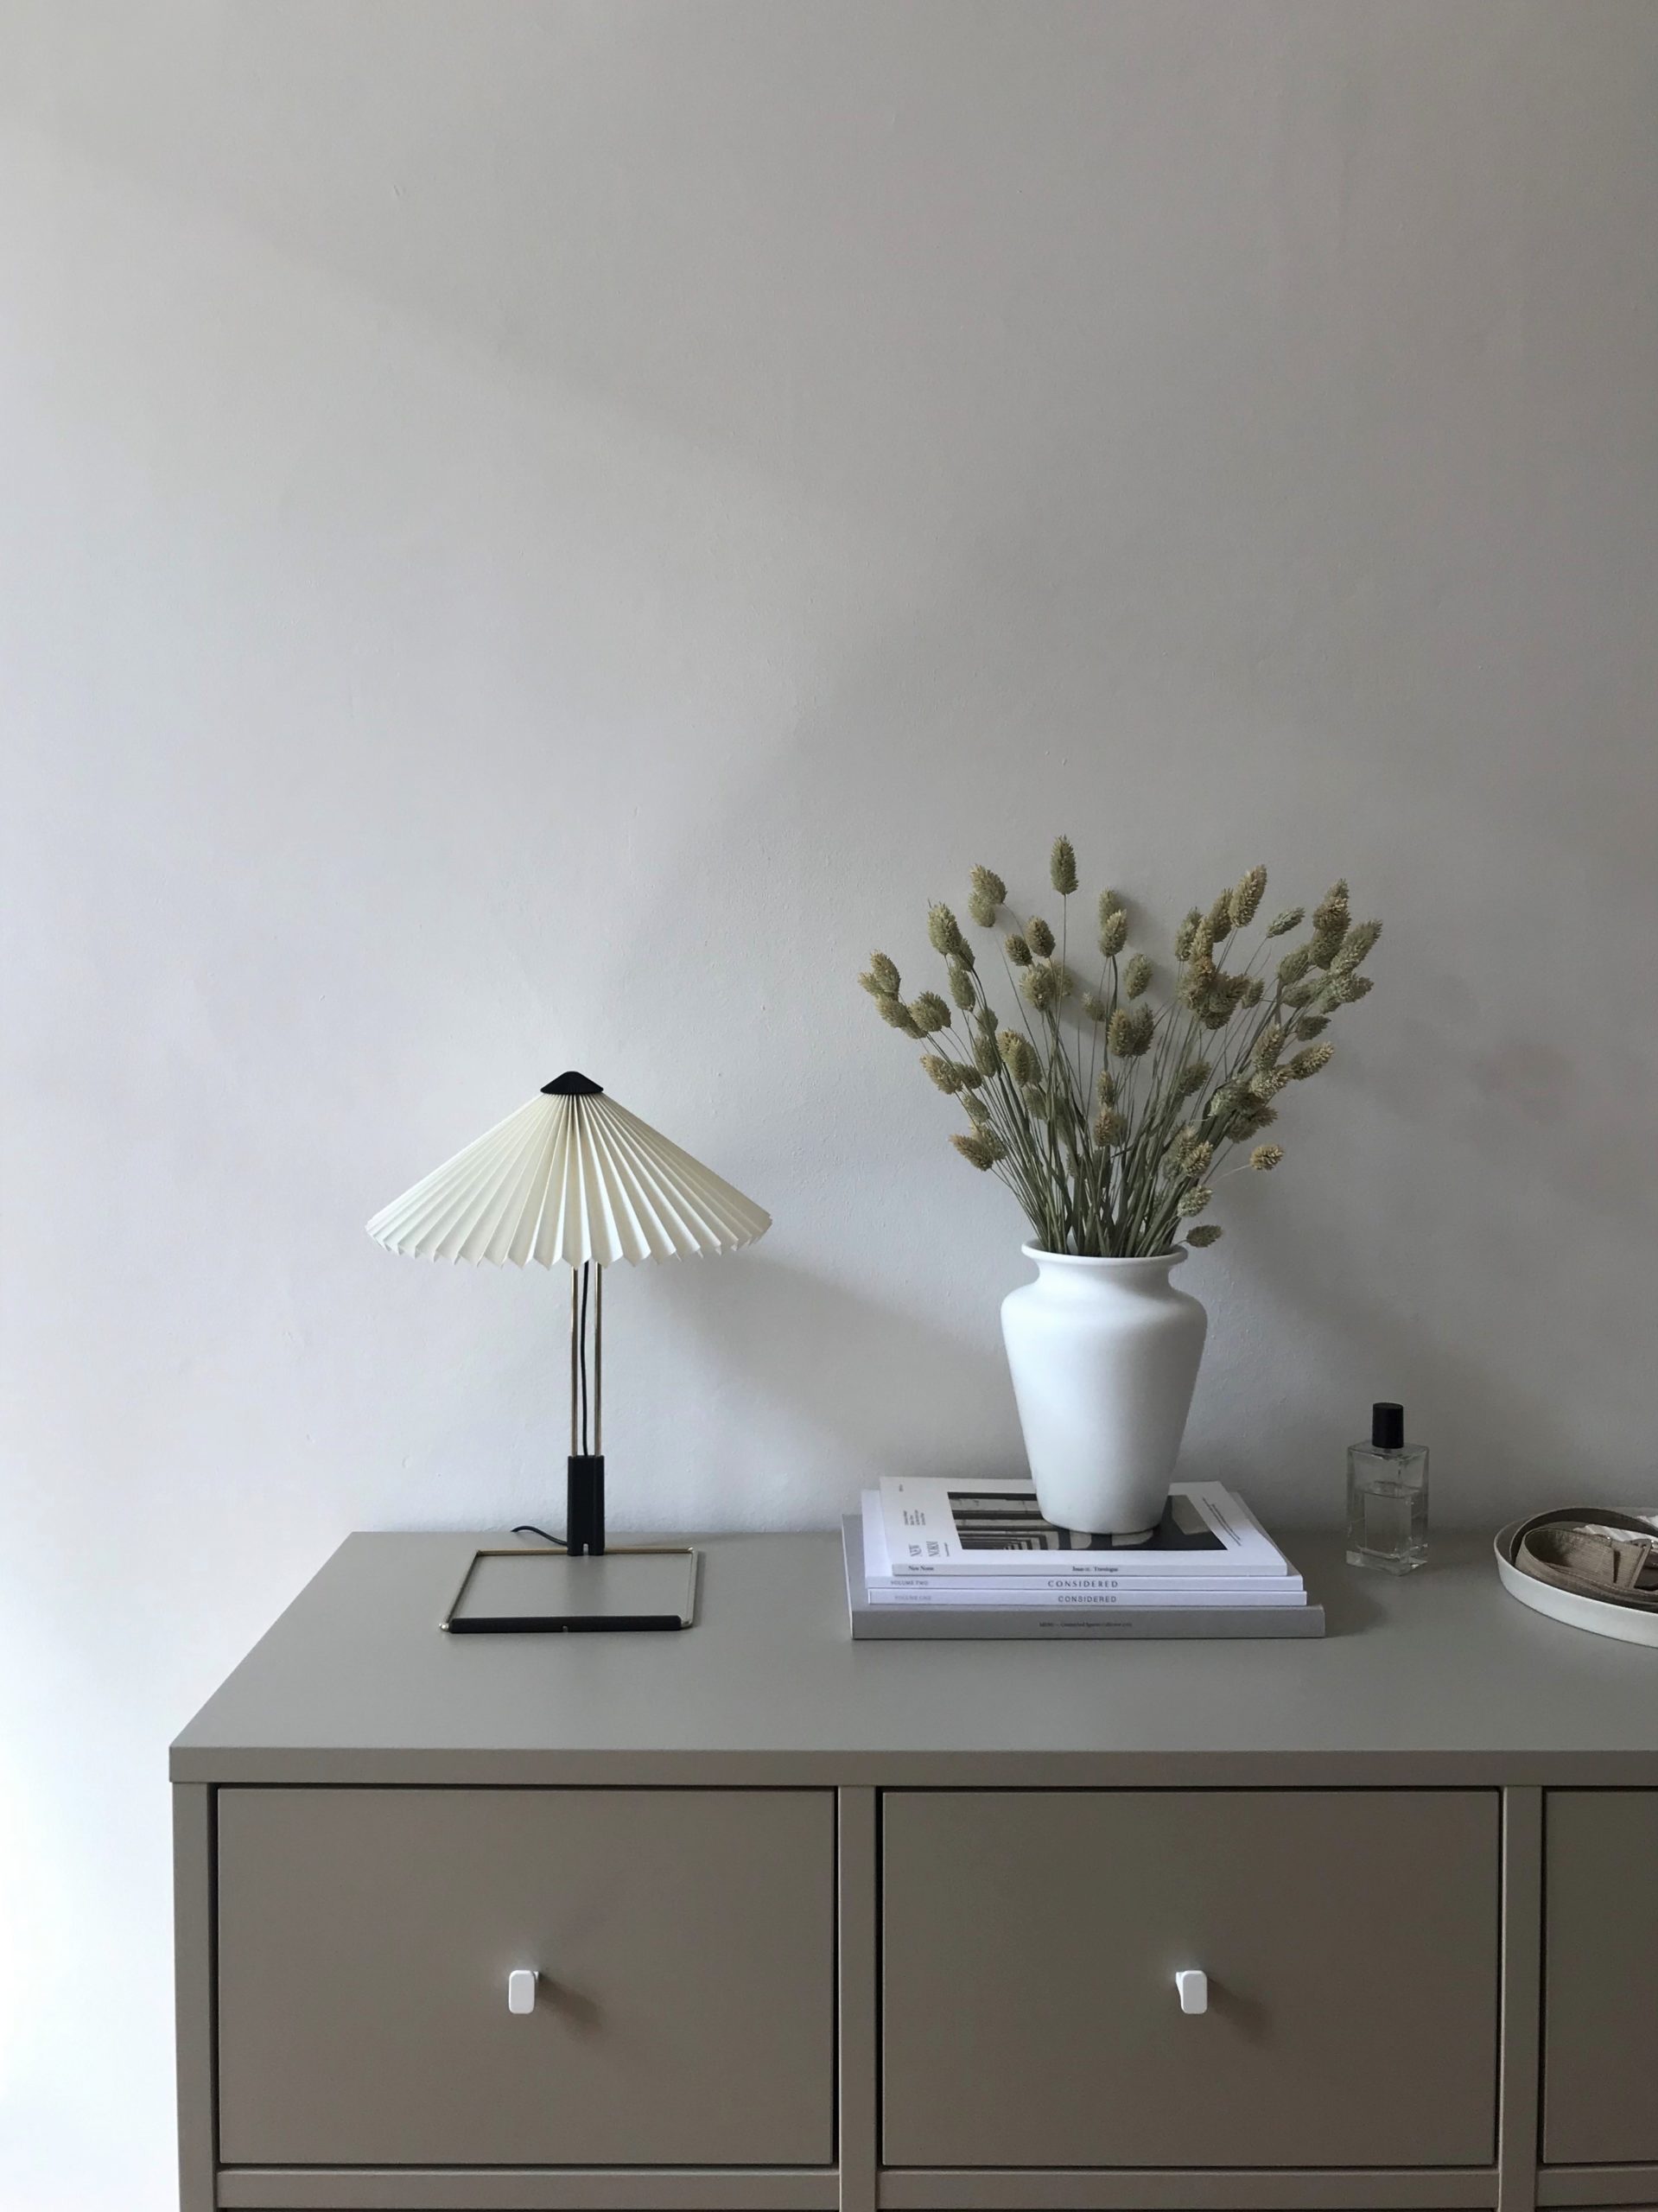 Hay Matin Lamp Minimal Danish Design Aesthetic Slow Living Simple Interior Inspo Neutral Colors Tones Beige Storage Dried Flowers Home Inspiration Rg Daily Blog Rg Daily,Modern Outdoor Water Fountain Design Ideas